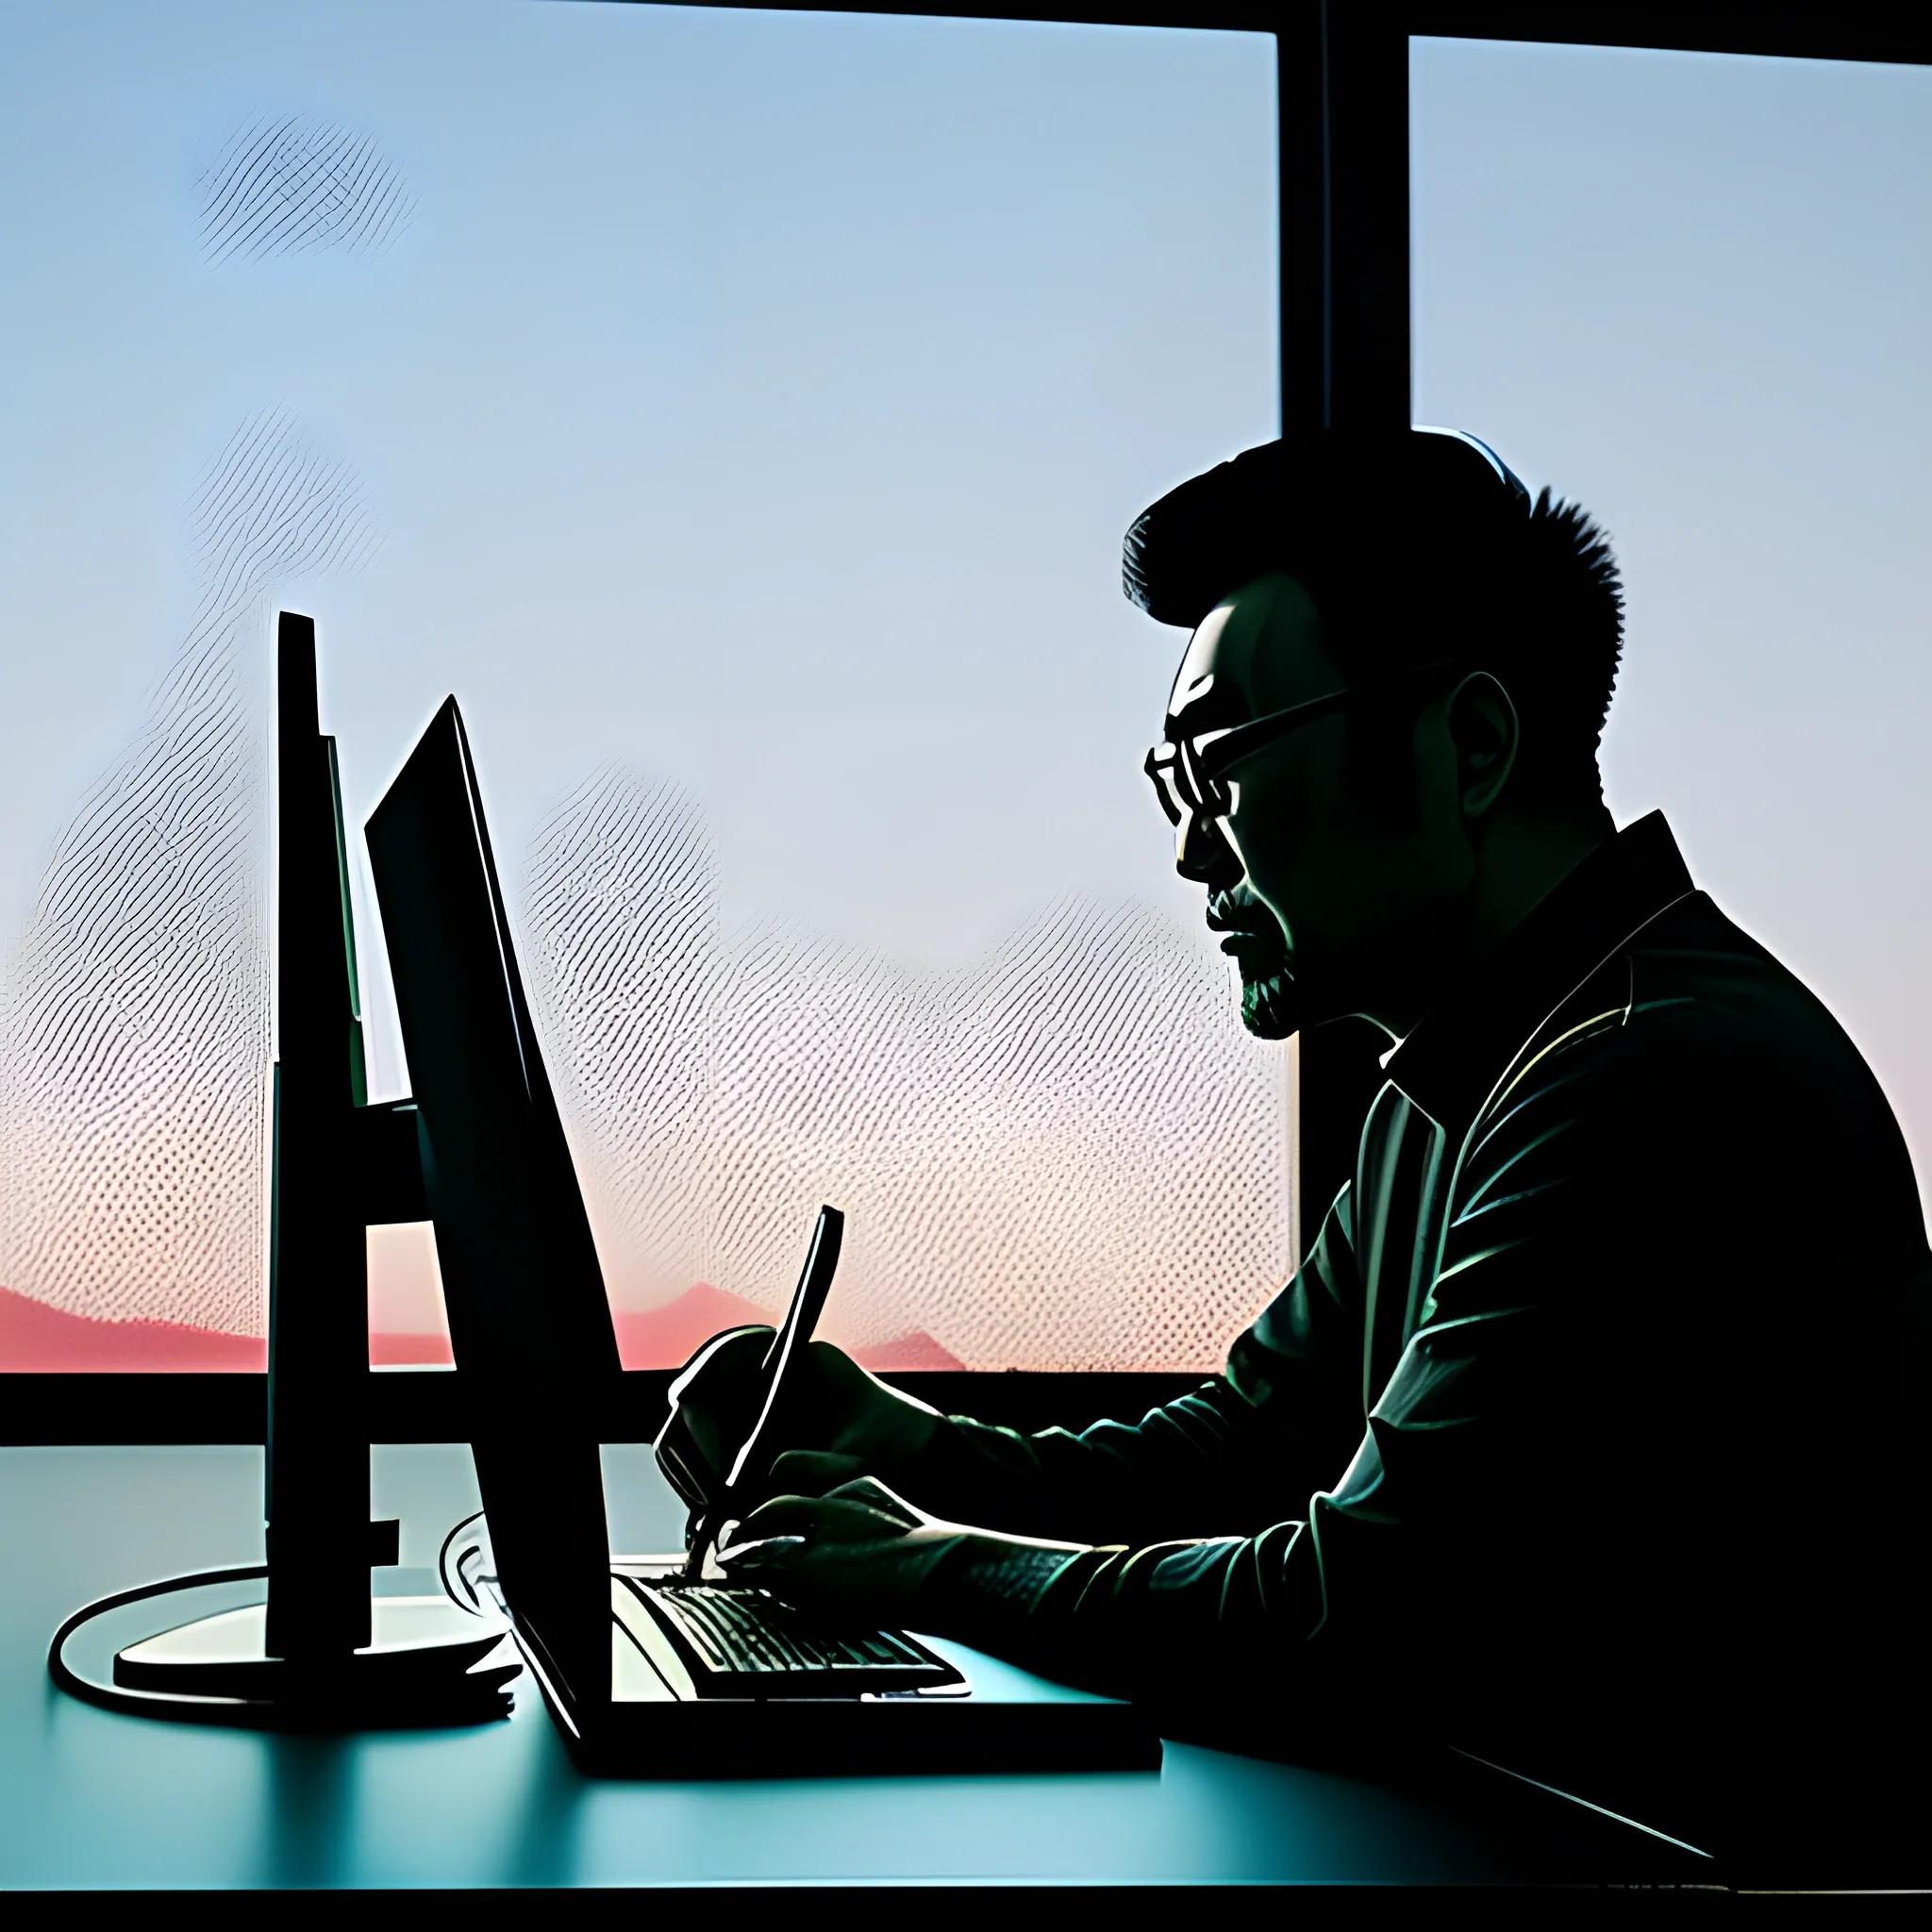 The silhouette of a Chinese boy, crouching on the computer desk and writing code, with a bright backdrop.